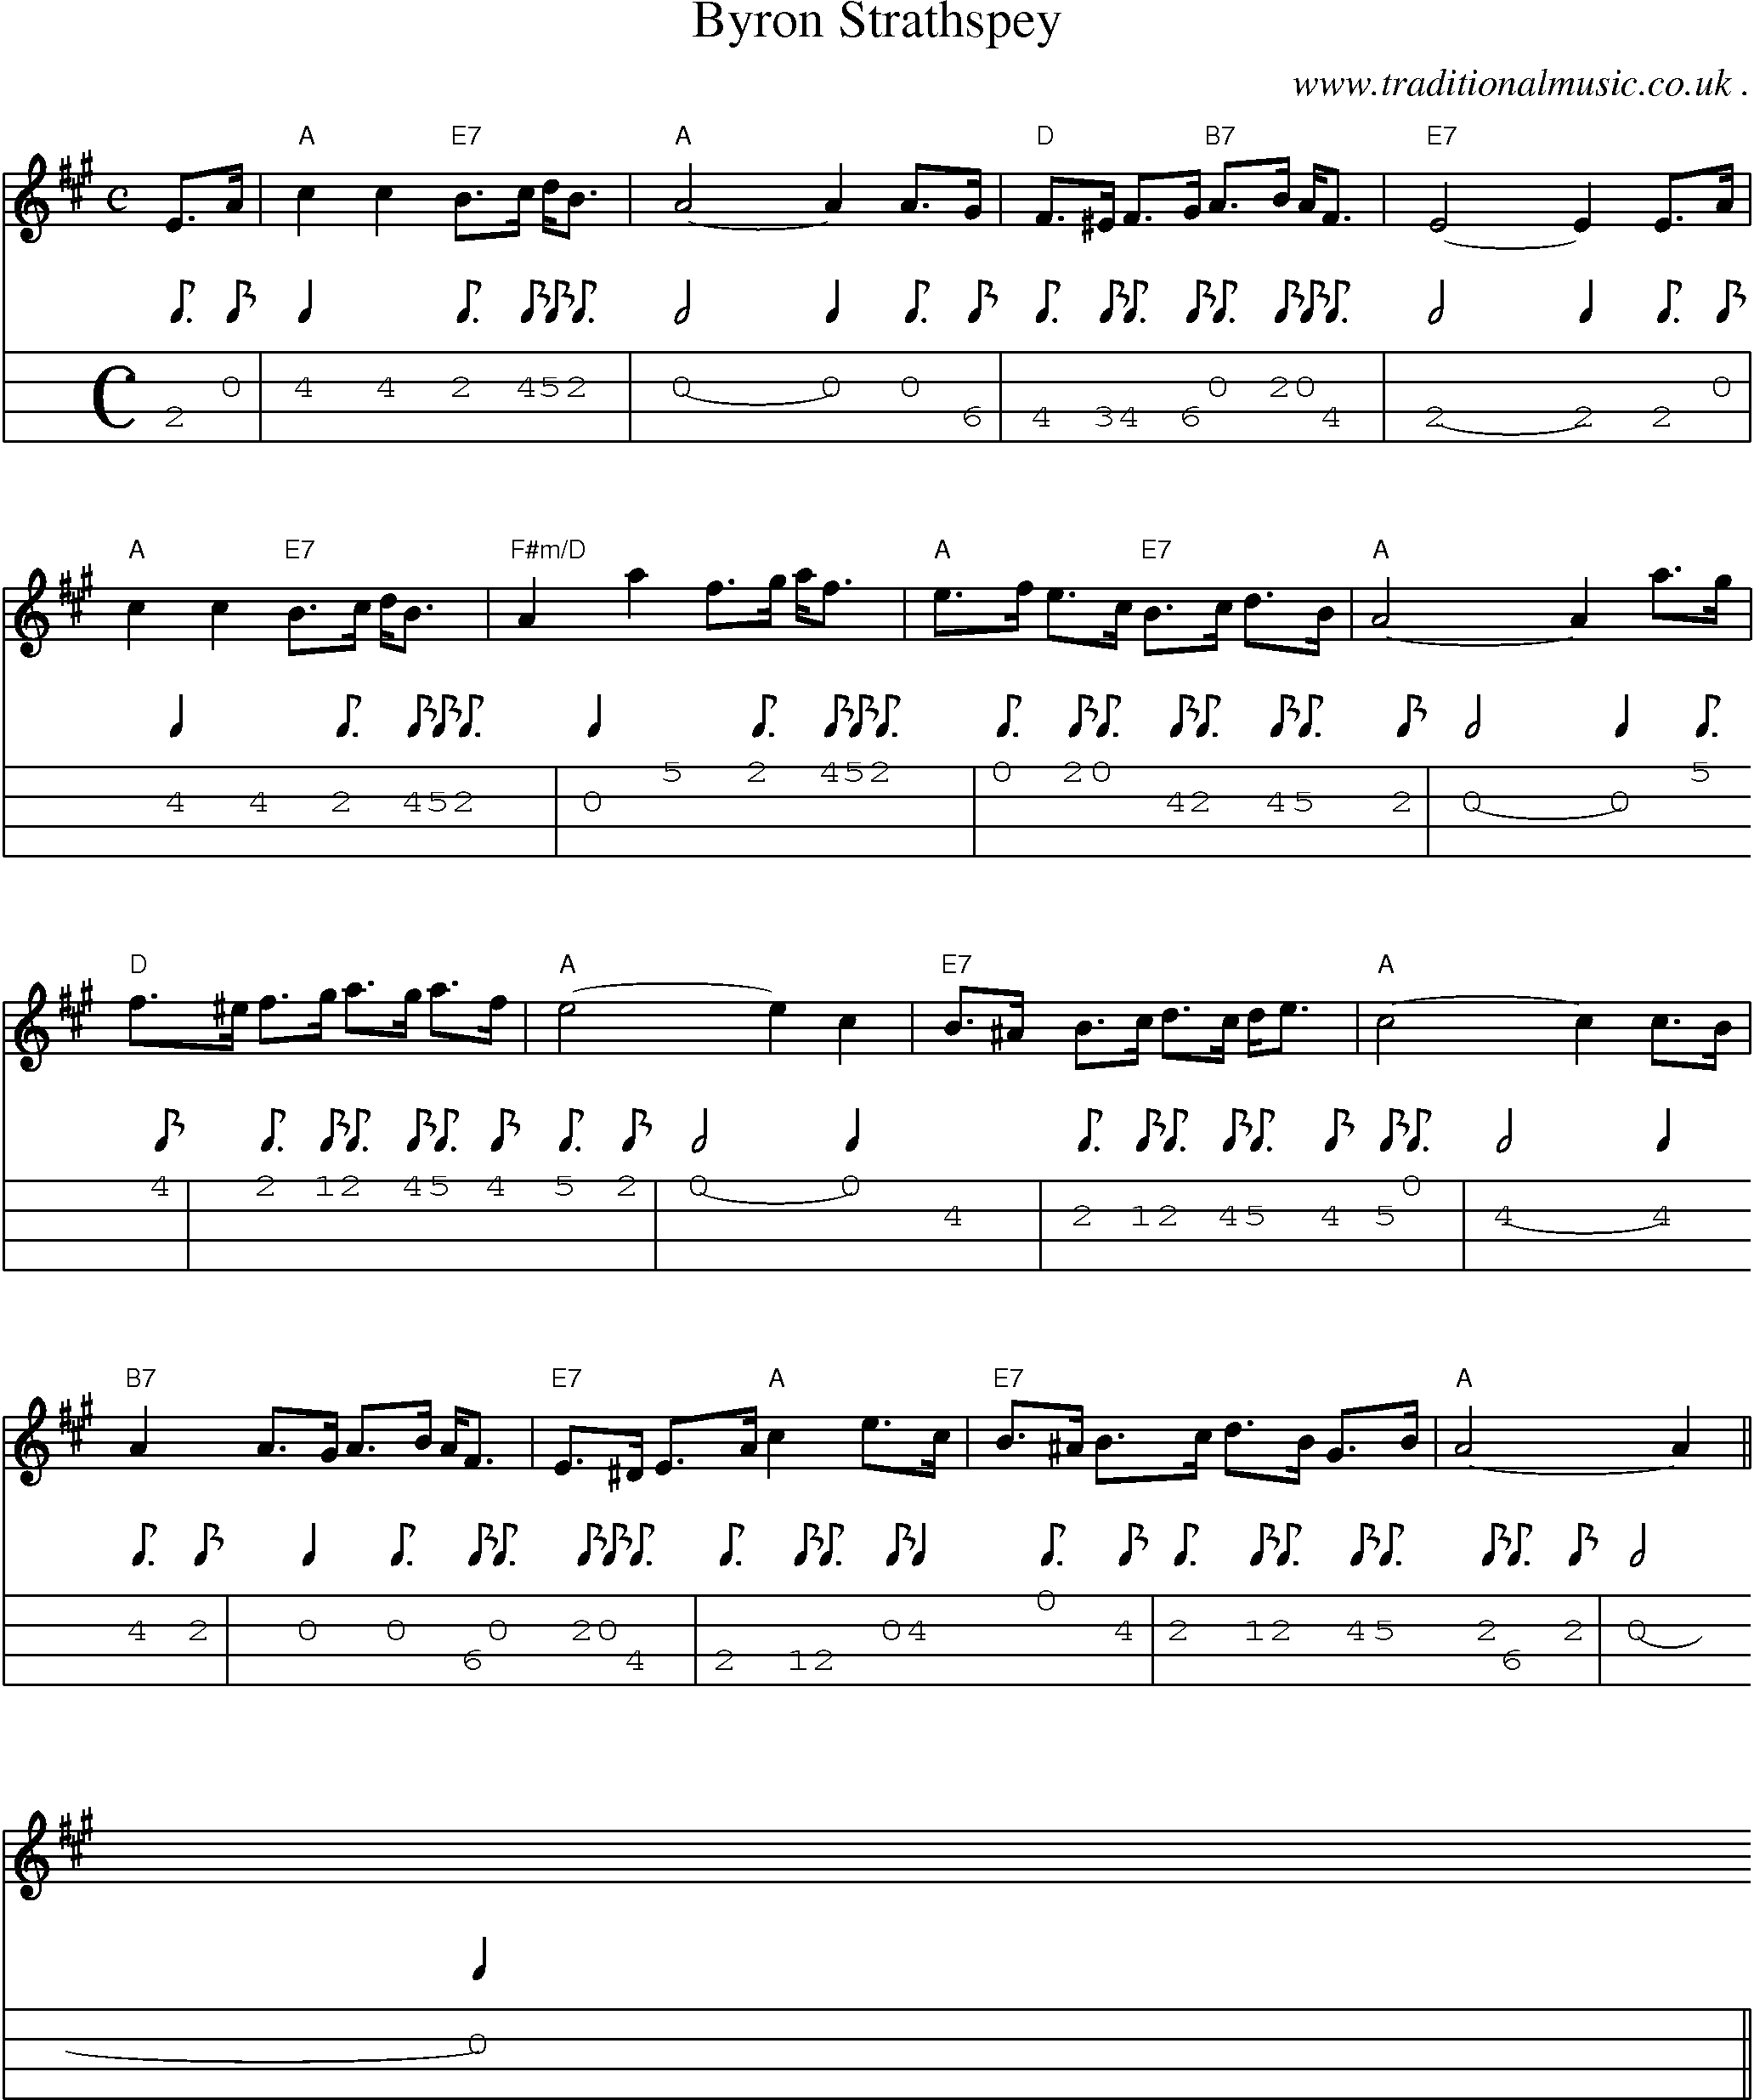 Sheet-music  score, Chords and Mandolin Tabs for Byron Strathspey